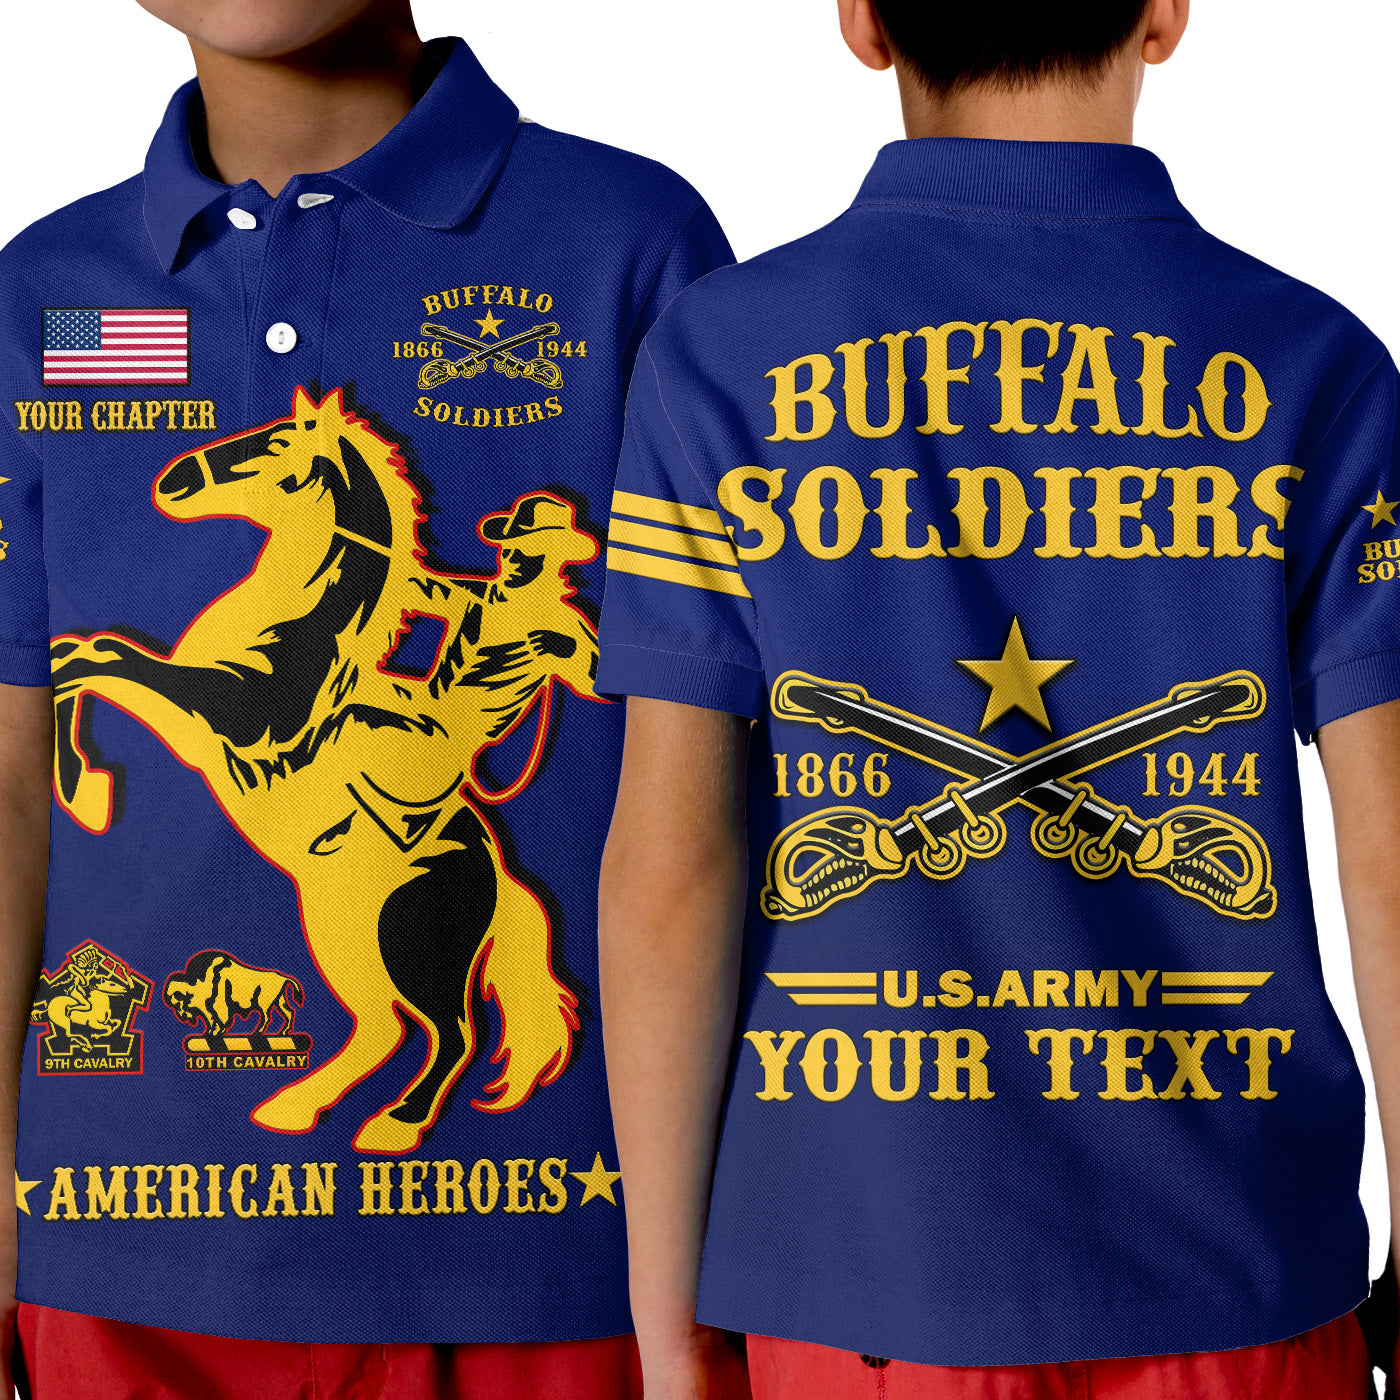 custom-text-and-chapter-buffalo-soldiers-polo-shirt-kid-bsmc-united-states-army-simple-style